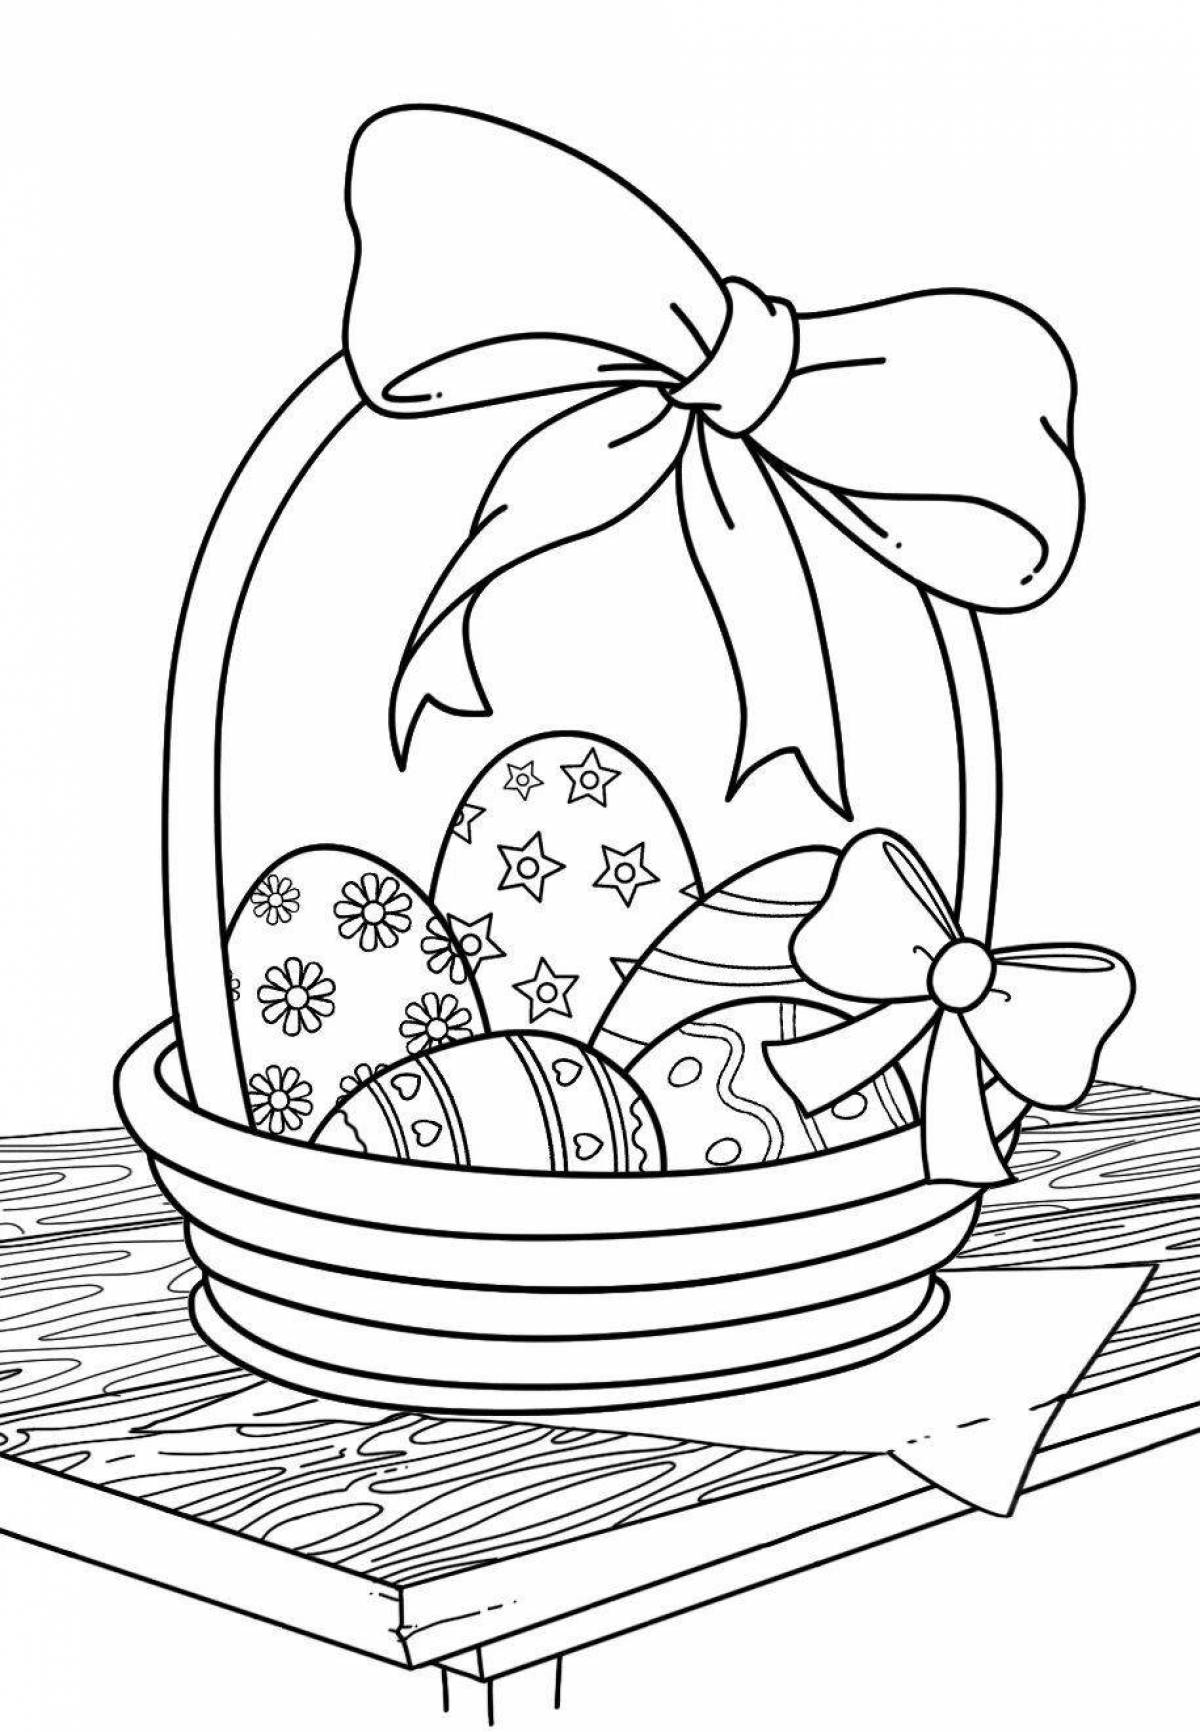 A fun Easter coloring book for kids